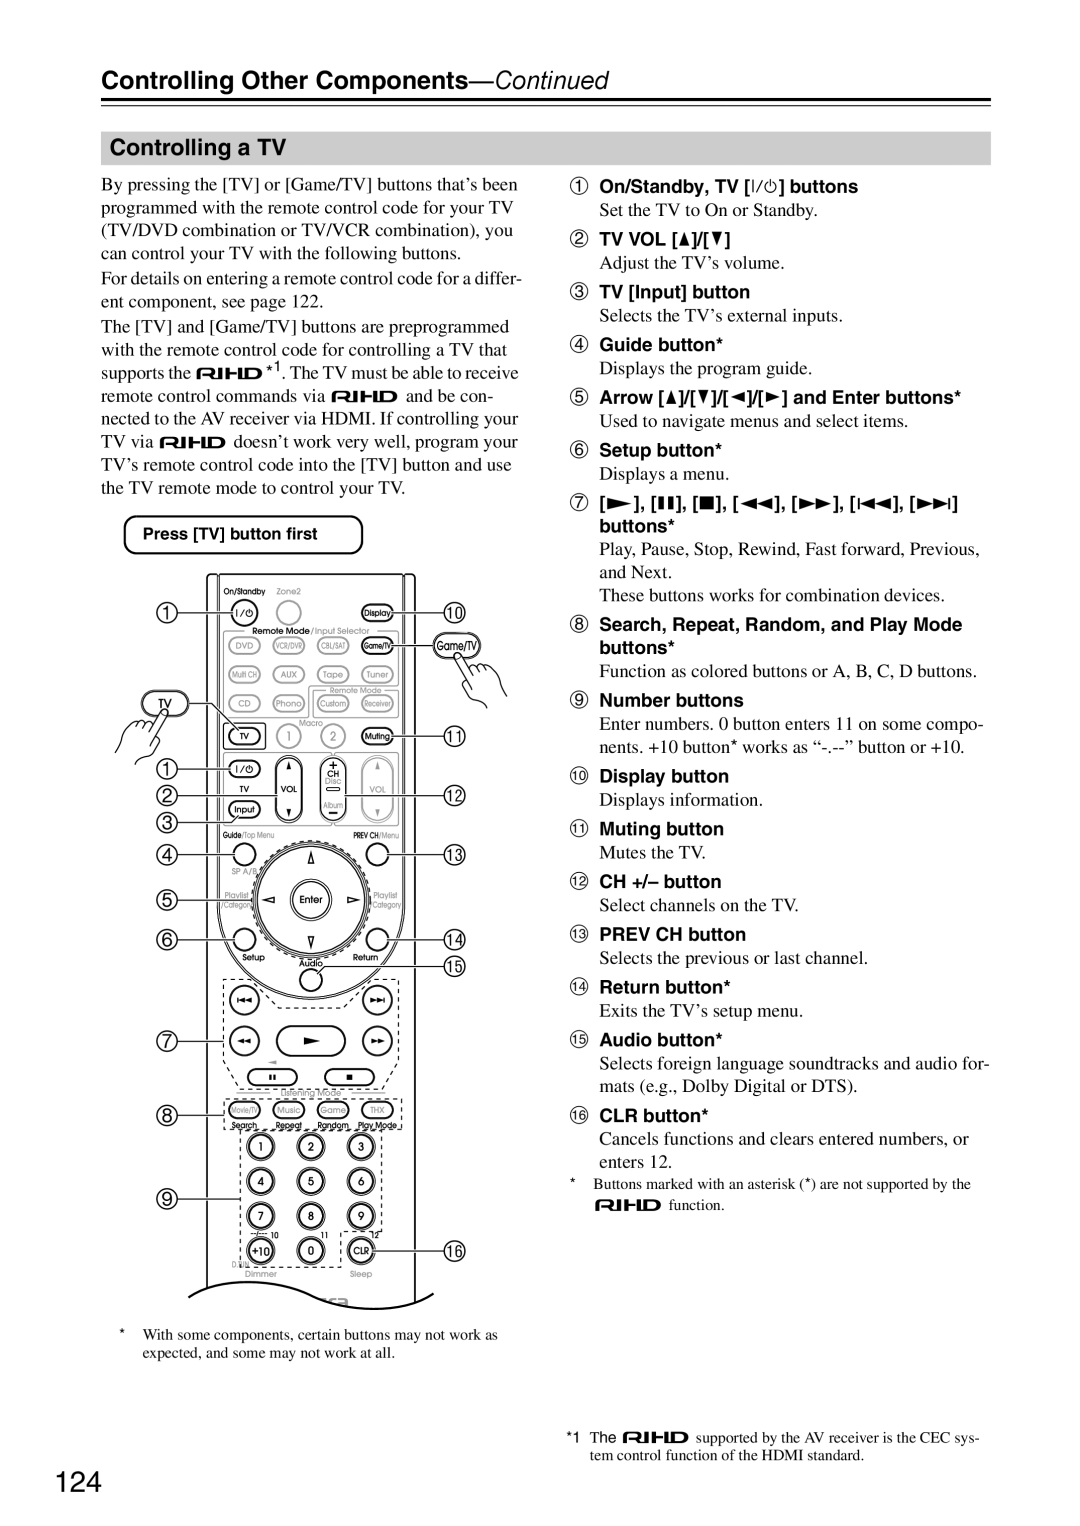 Onkyo DTR-7.9 instruction manual 78 9 bq, Controlling a TV, Controlling Other Components-Continued 